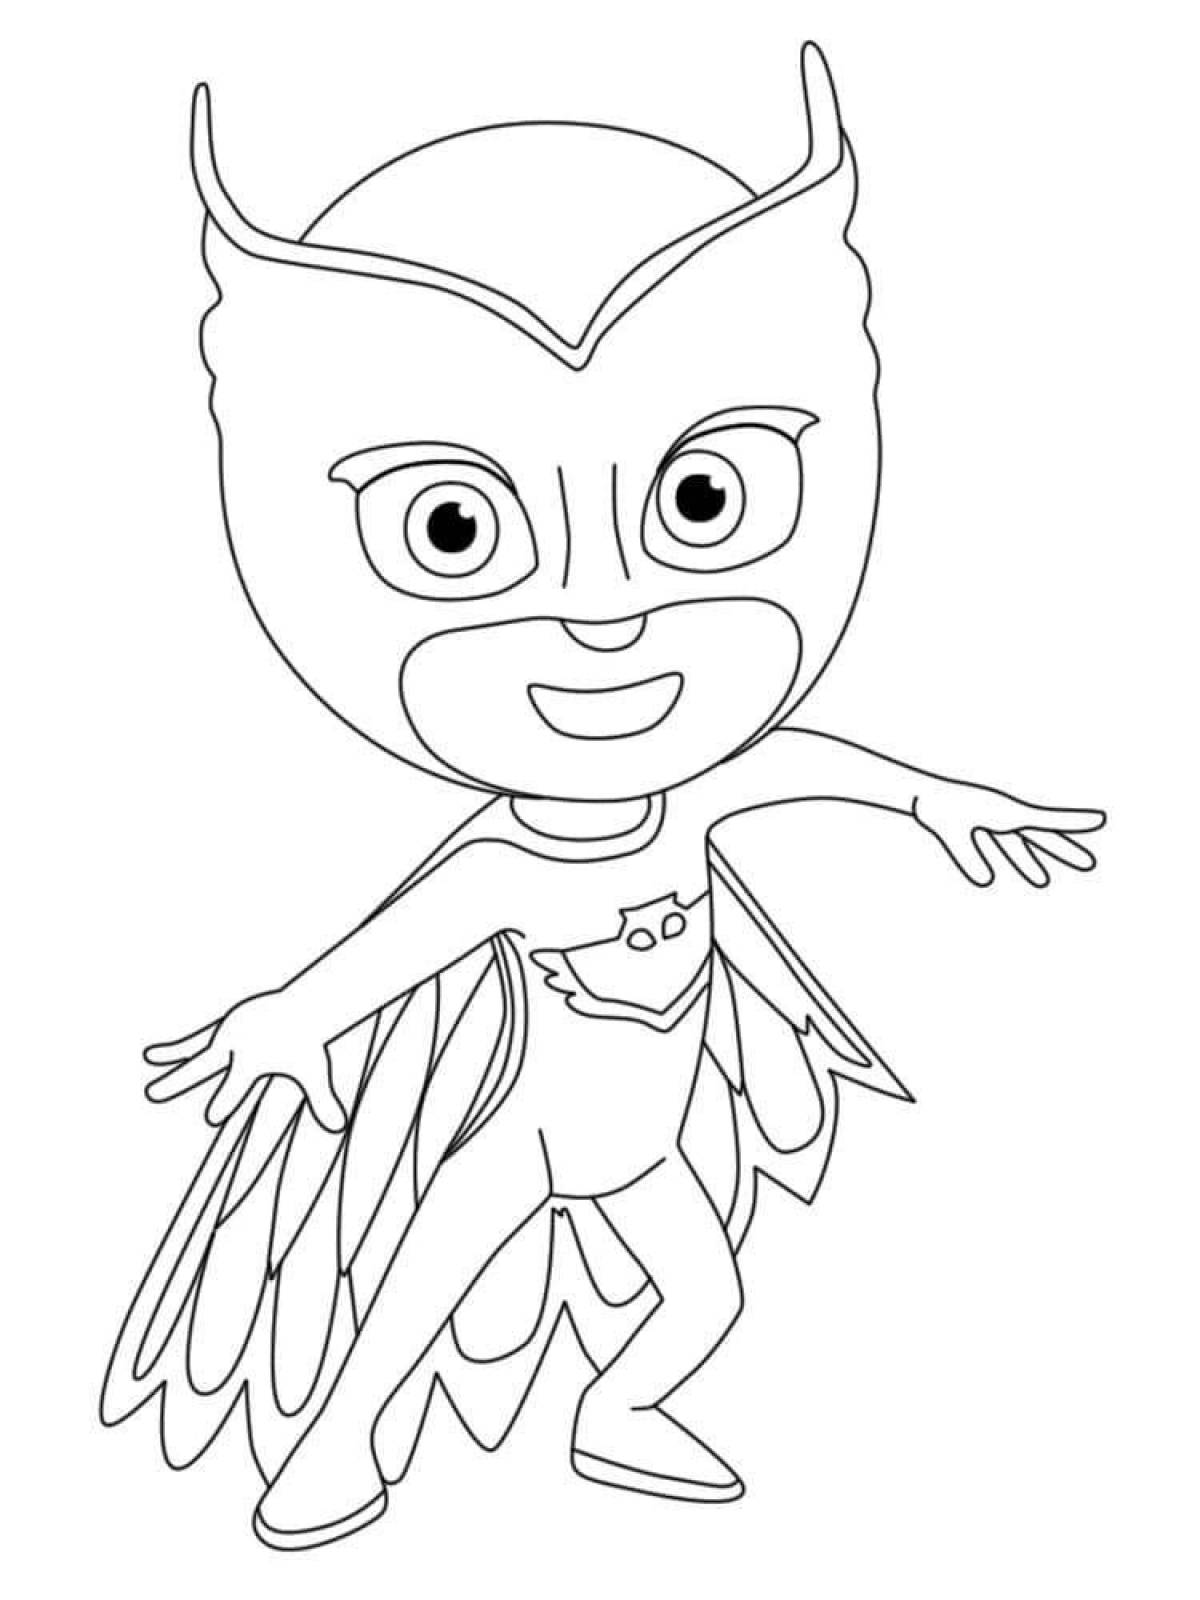 Colorful coloring pages heroes